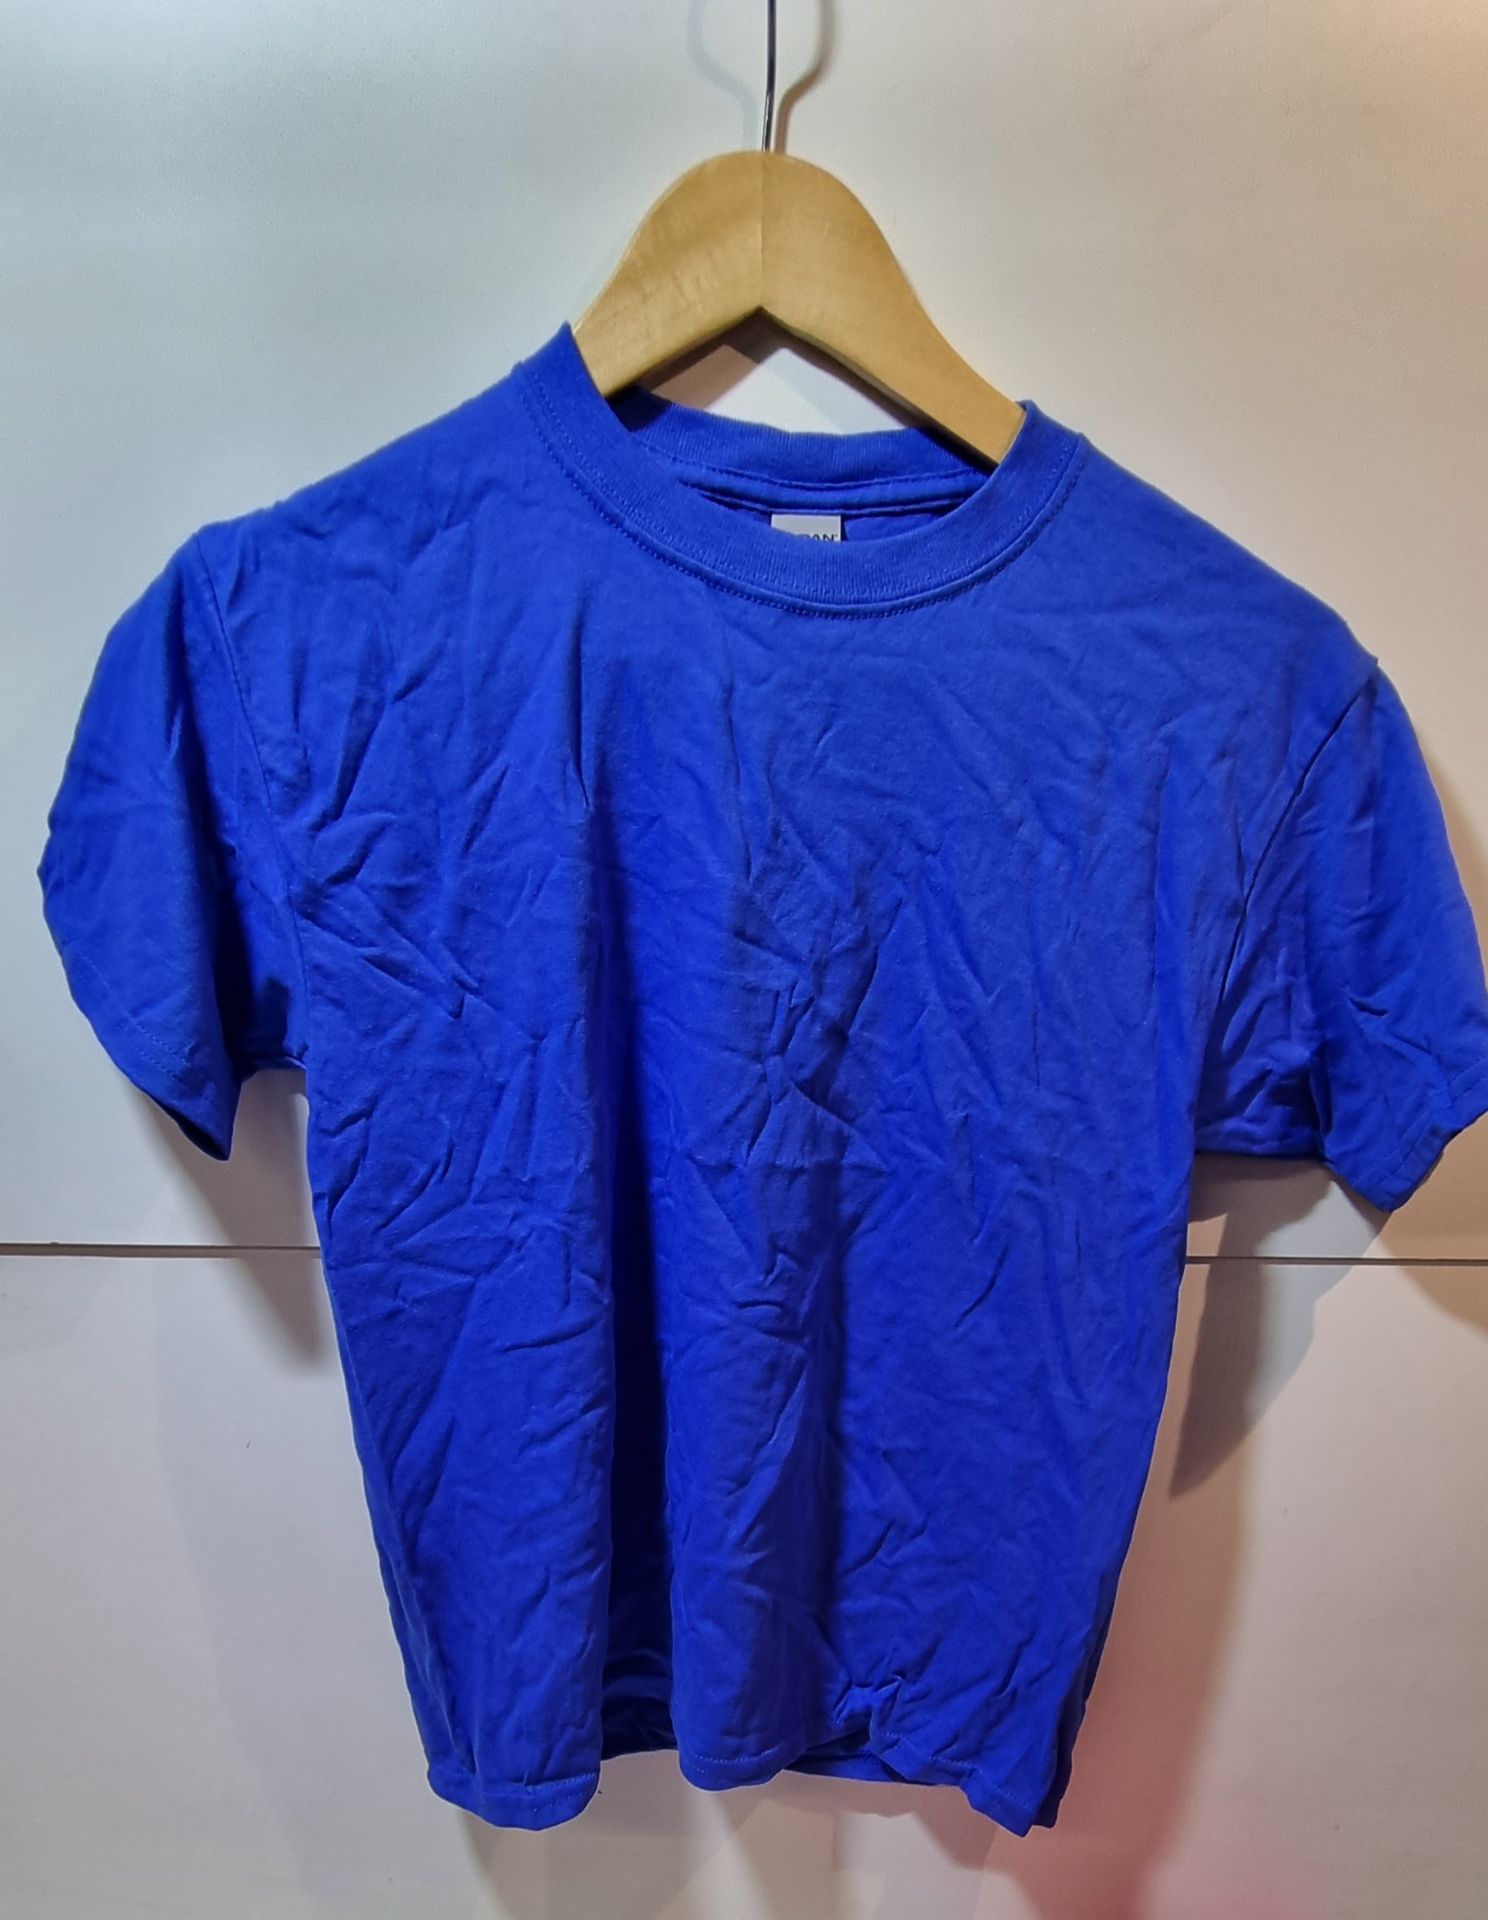 22 x Various Gildan/SF Cotton Adult T Shirts in Various Colours & Sizes - Image 4 of 8